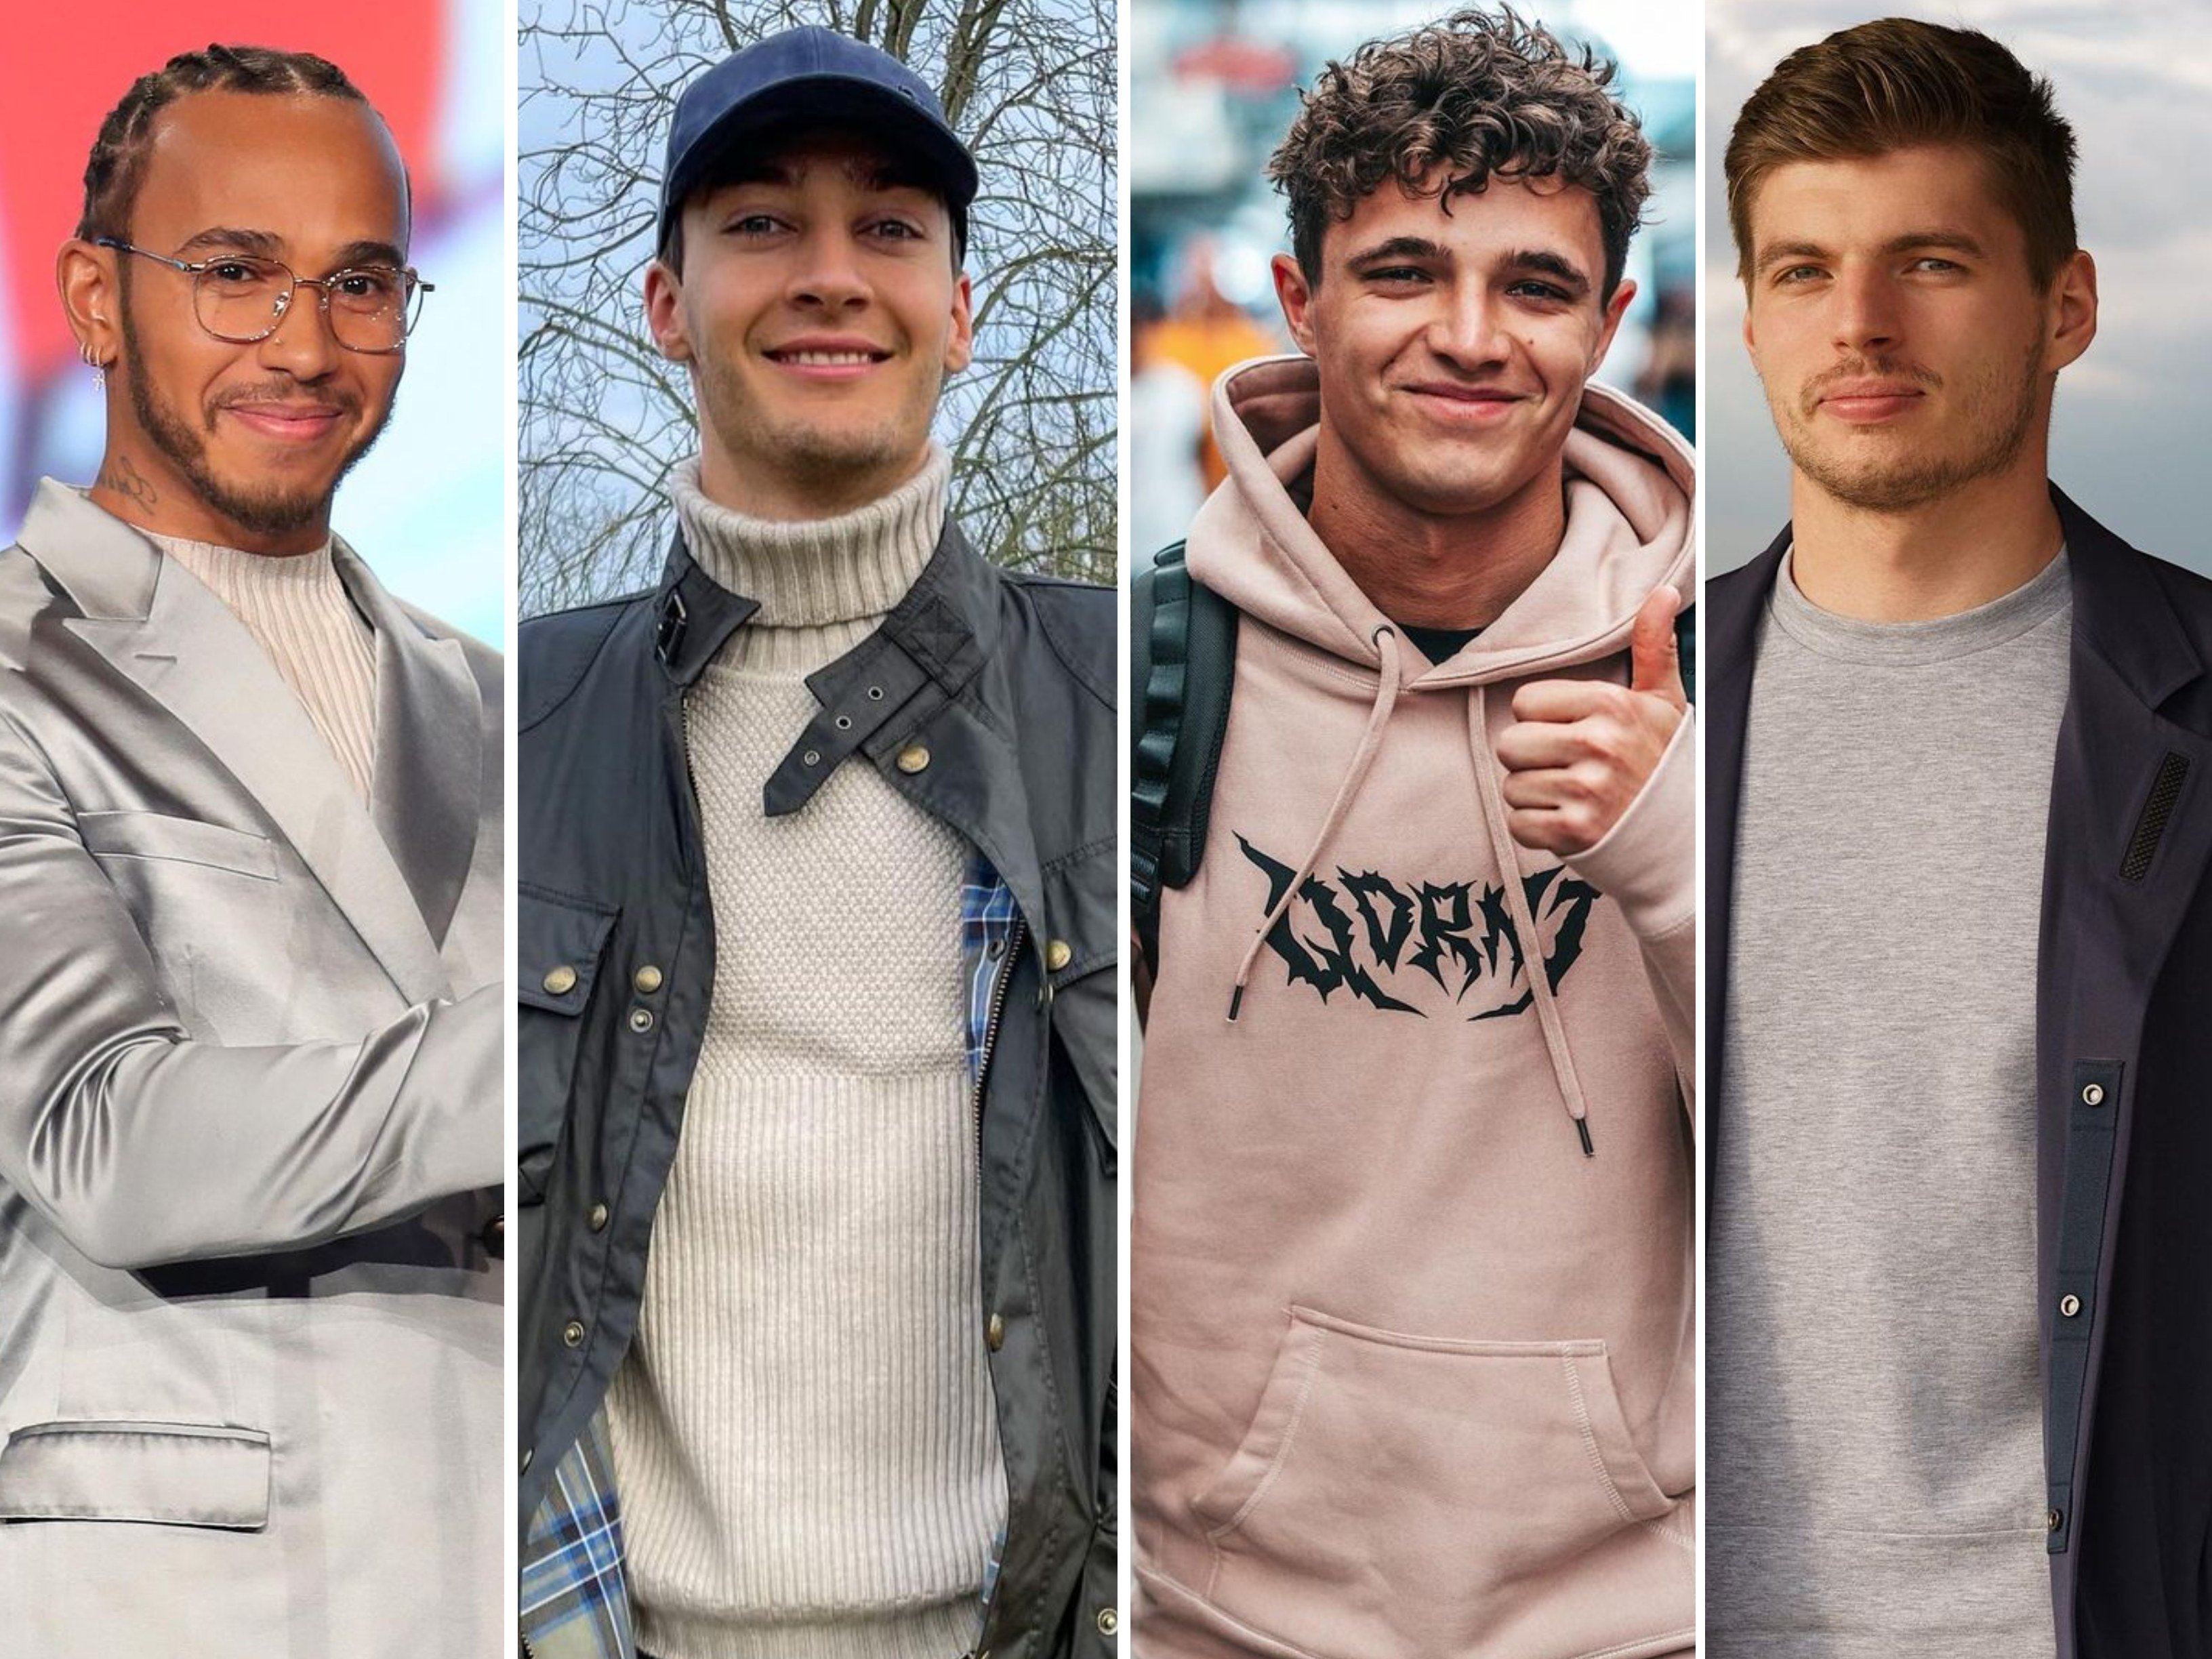 Lewis Hamilton, George Russell, Lando Norris and Max Verstappen all raked in big money this year. Photos: @lewishamilton; @georgerussell63; @landonorris; @maxverstappen1/Instagram